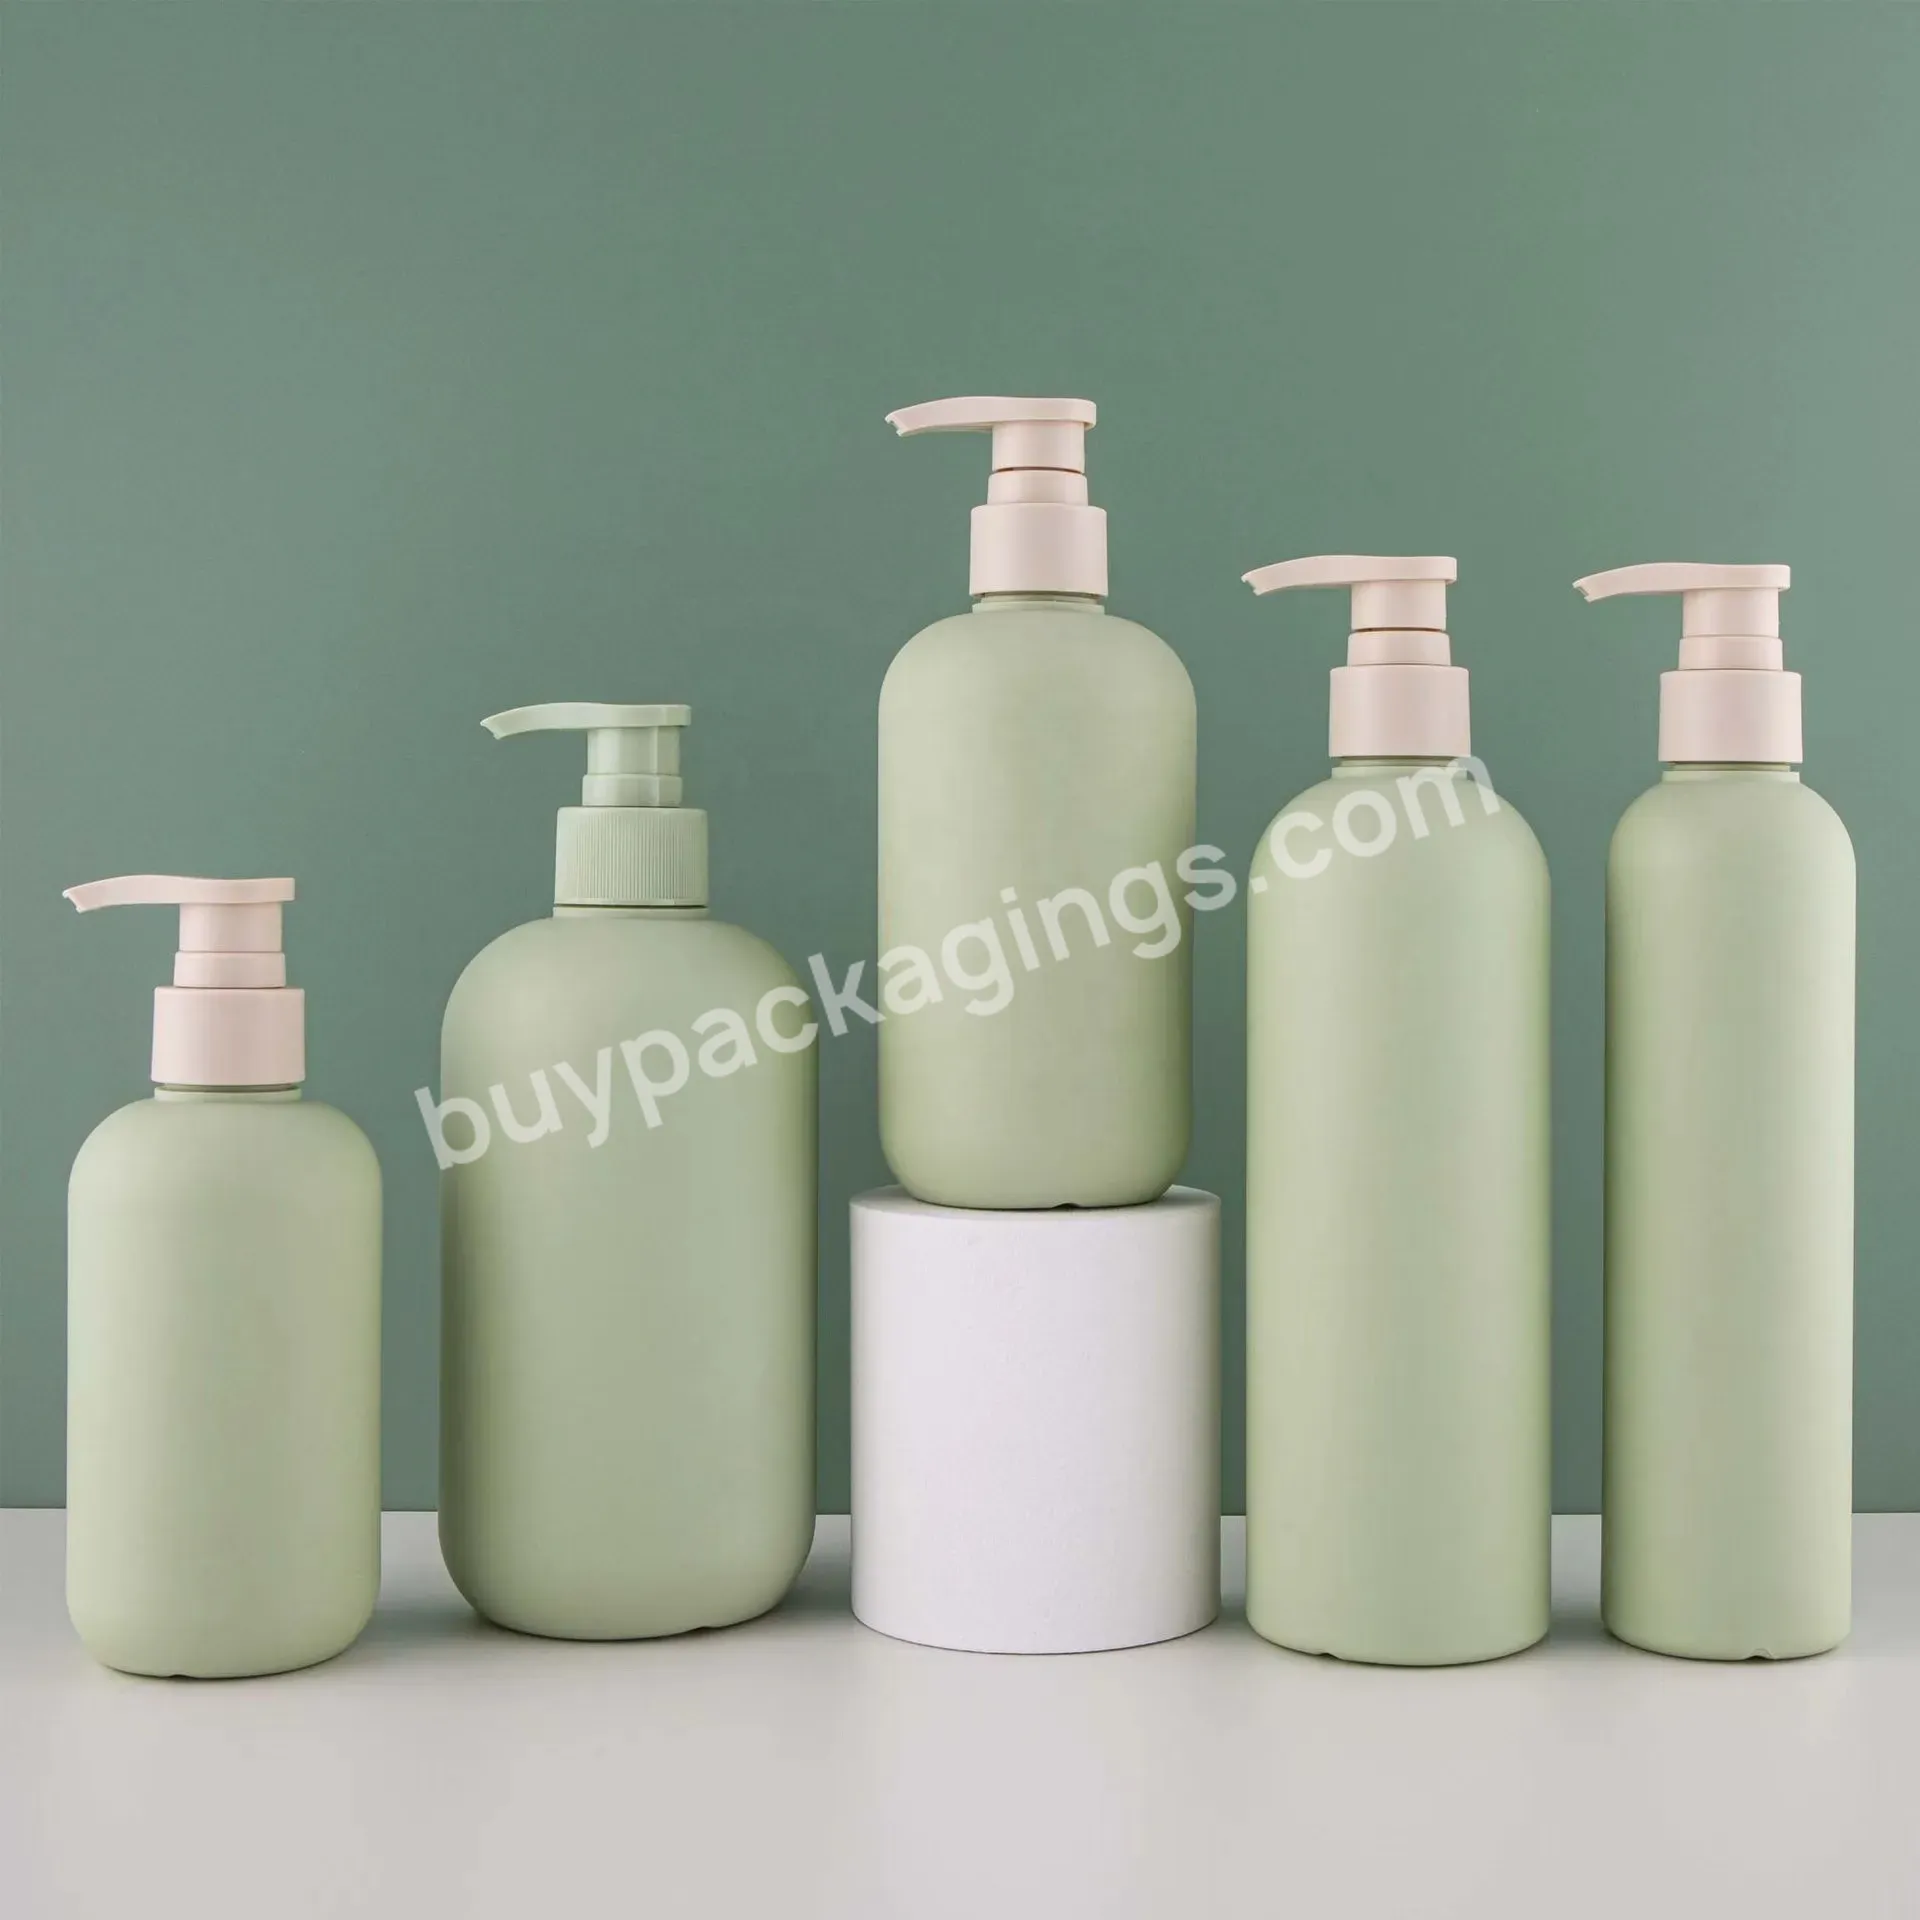 Skincare Bottle Pump Sprayer Frost Liquid Soap Packaging Recycled Hdpe With Plastic Green In Stock 200ml 260ml 300ml 400ml 500ml - Buy Recyclable Bottles 310ml,Biodegradable Wheat Straw Bottles,Amber Hdpe Plastic Bottle.